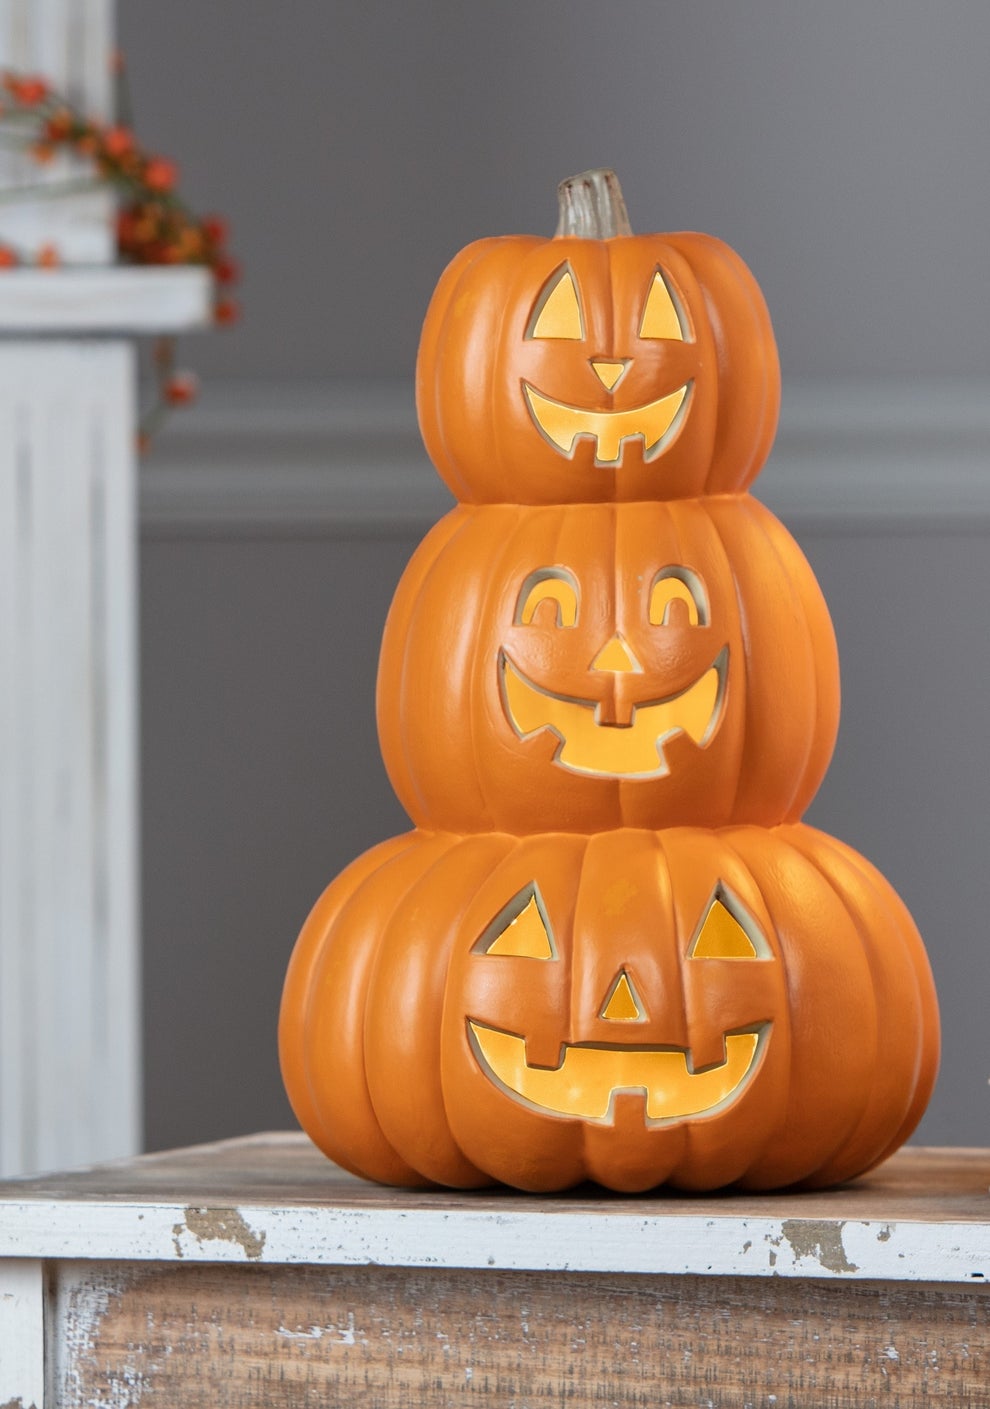 31 Things From Walmart That’ll Help Get Your Home In The Spooky Spirit